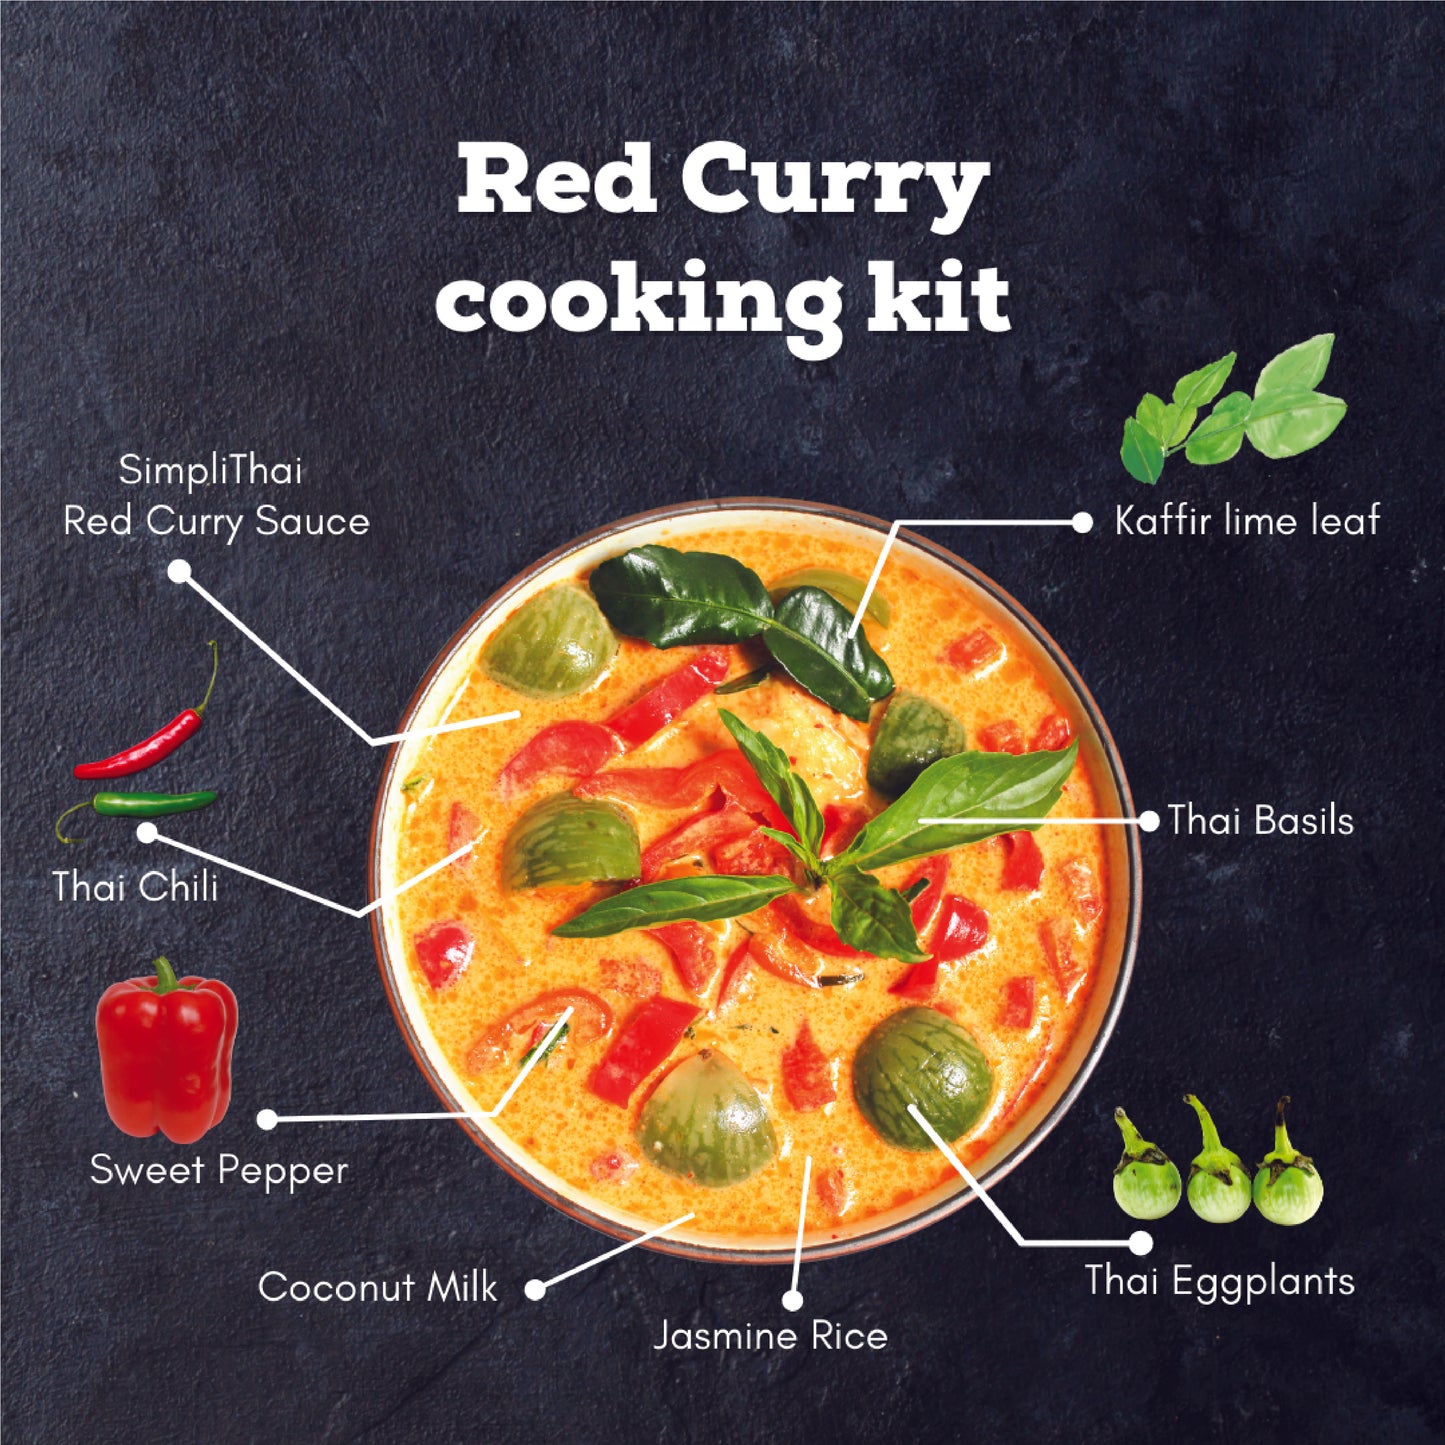 Red Curry cooking kit